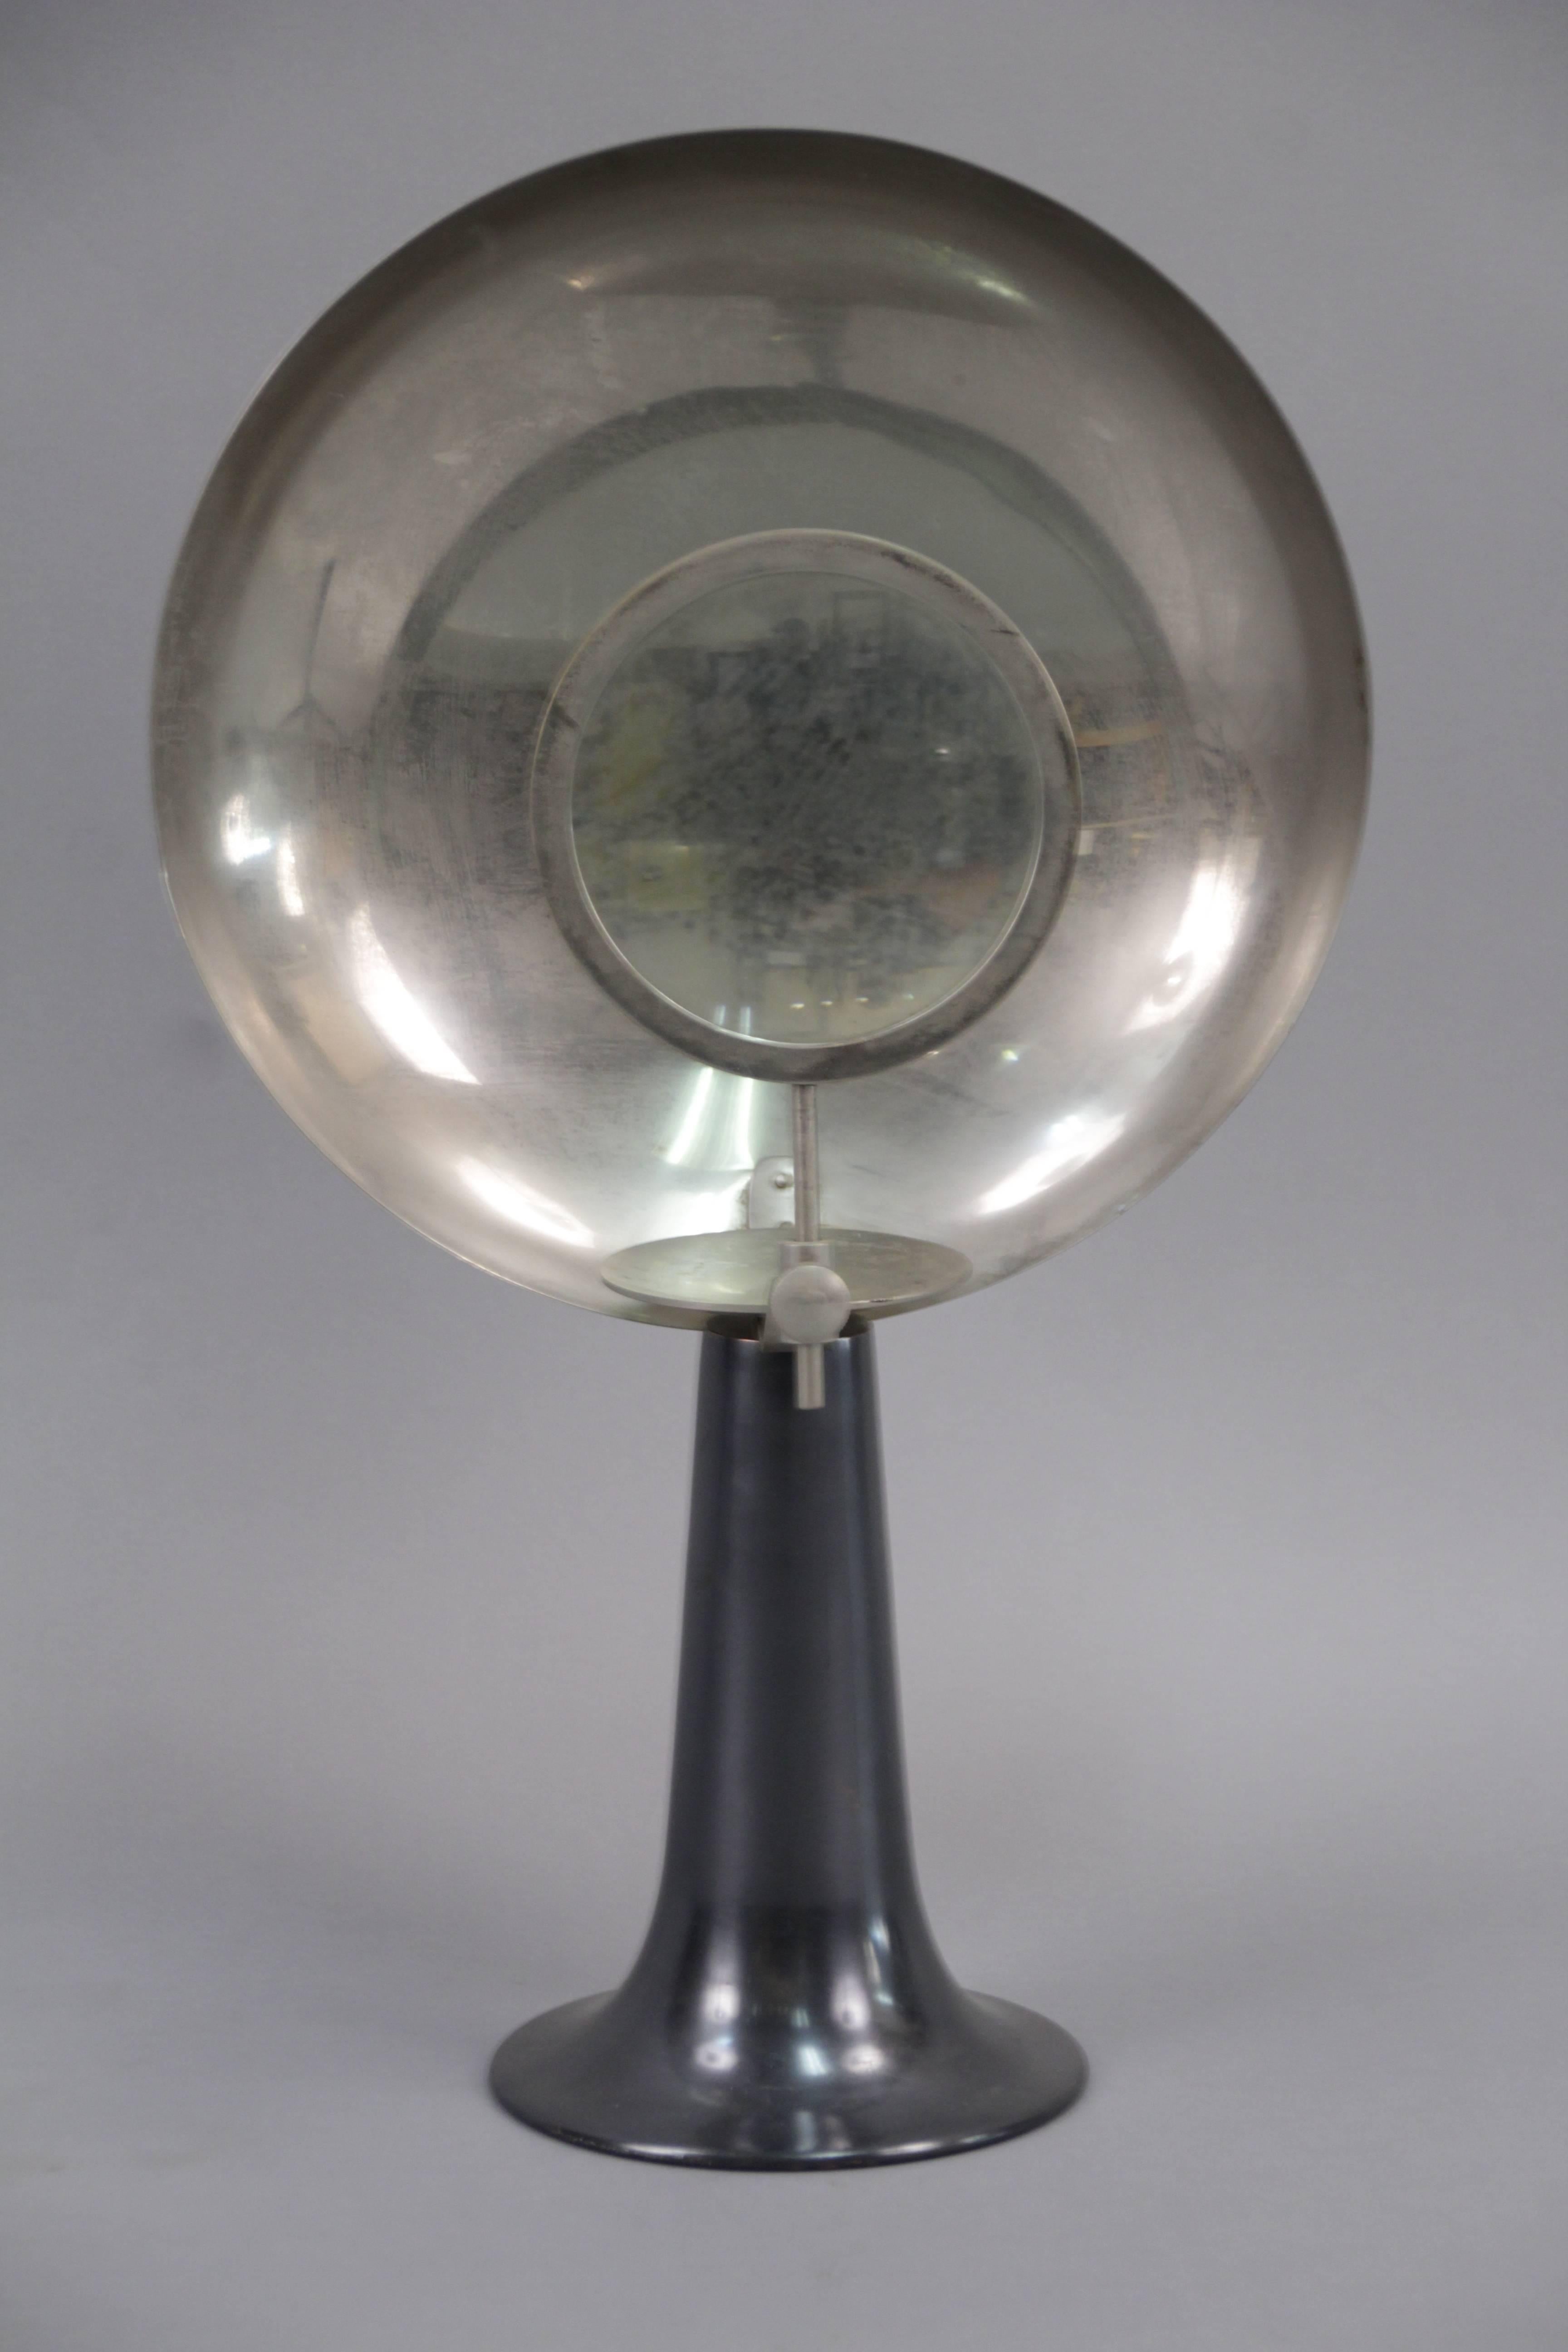 Wonderful magnifying candle lamp. Old medical or scientific lamp.